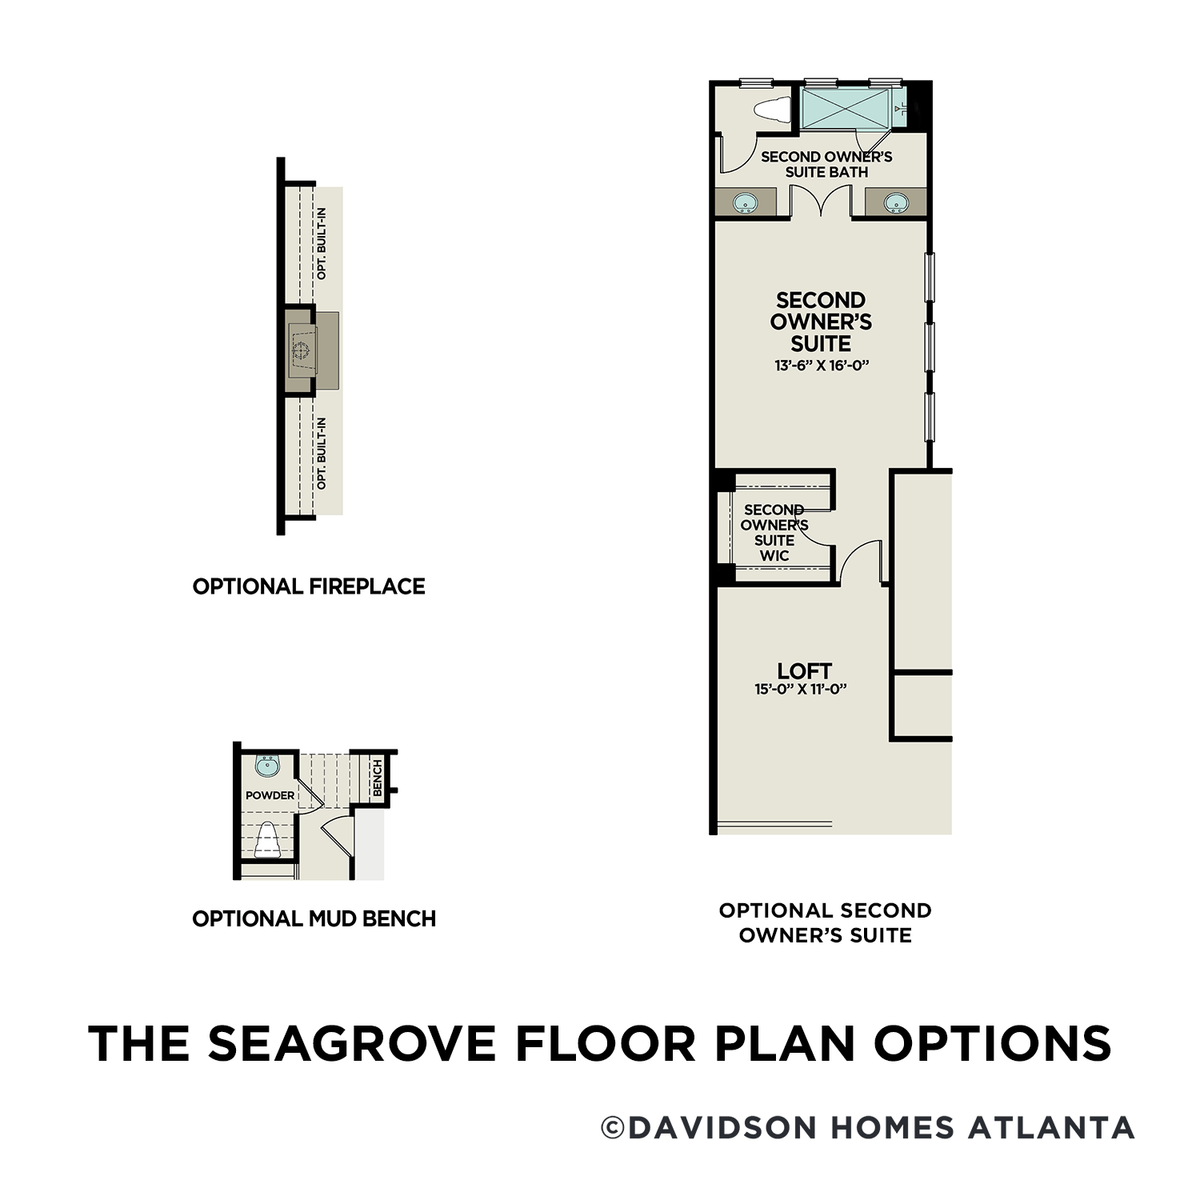 3 - The Seagrove B floor plan layout for 760 Stickley Oak Way in Davidson Homes' The Village at Towne Lake community.